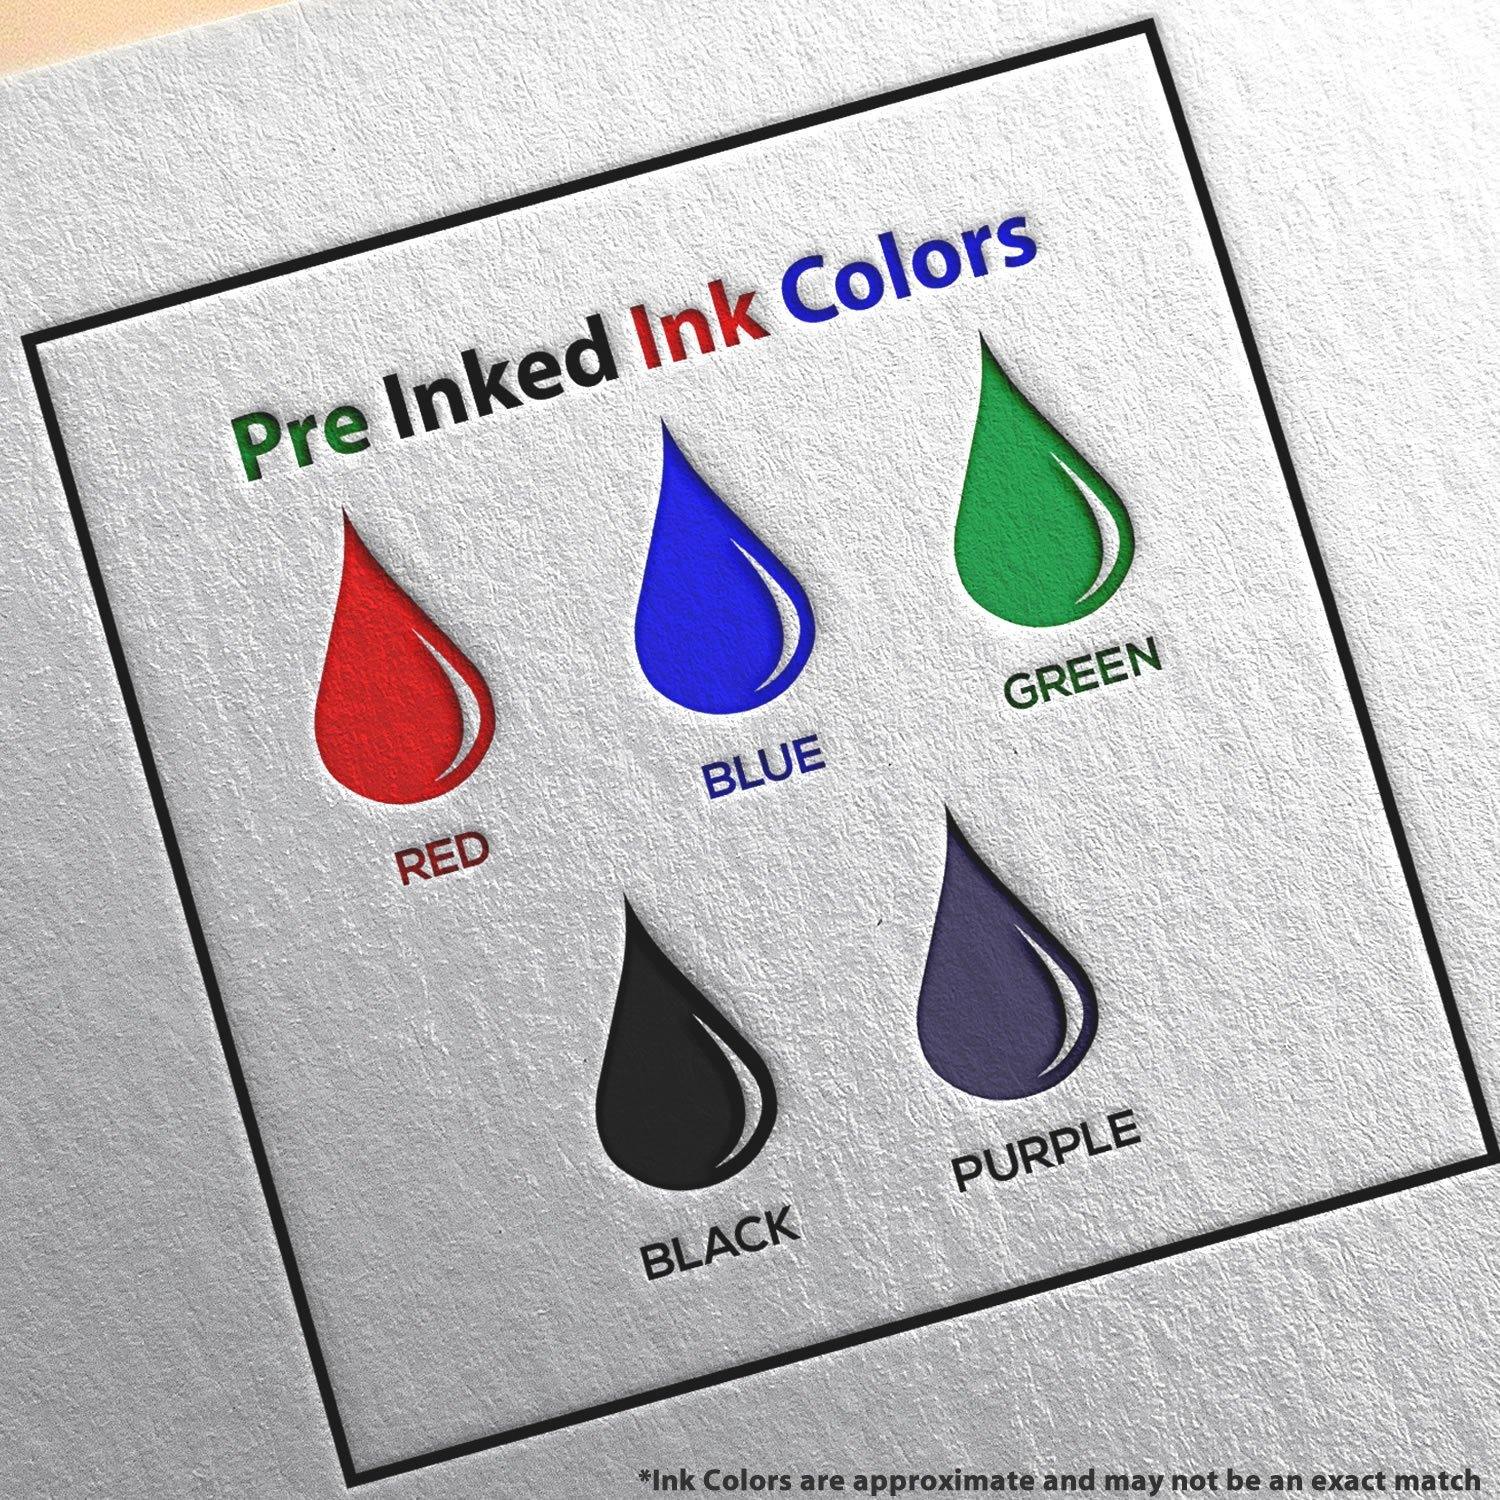 Large Pre-Inked Faxed with Date Box Stamp Ink Color Options